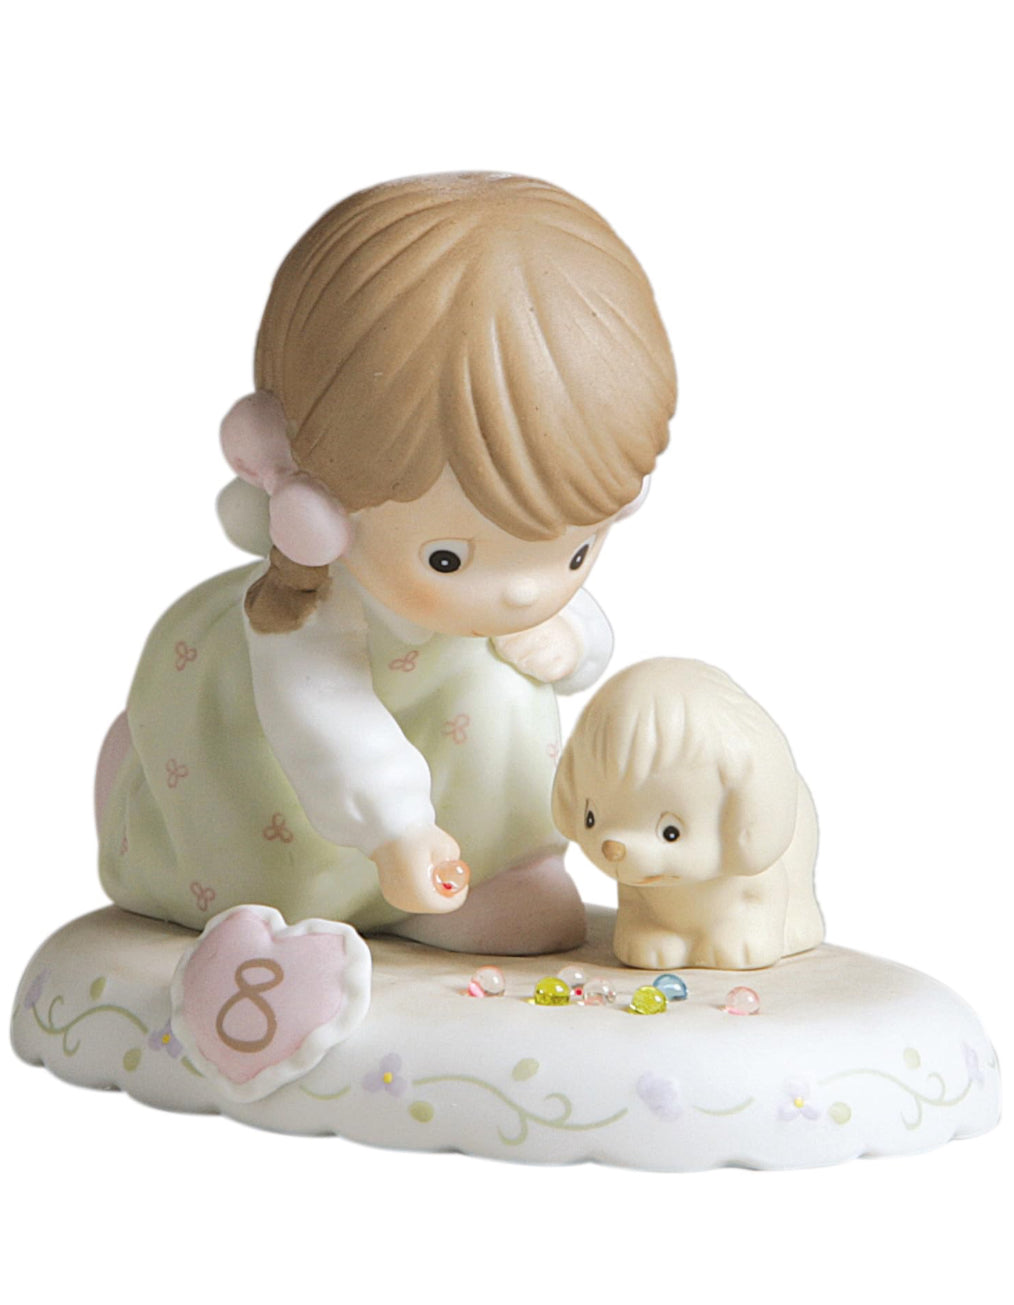 Growing in Grace Age 8 - Precious Moment Figurine 163759